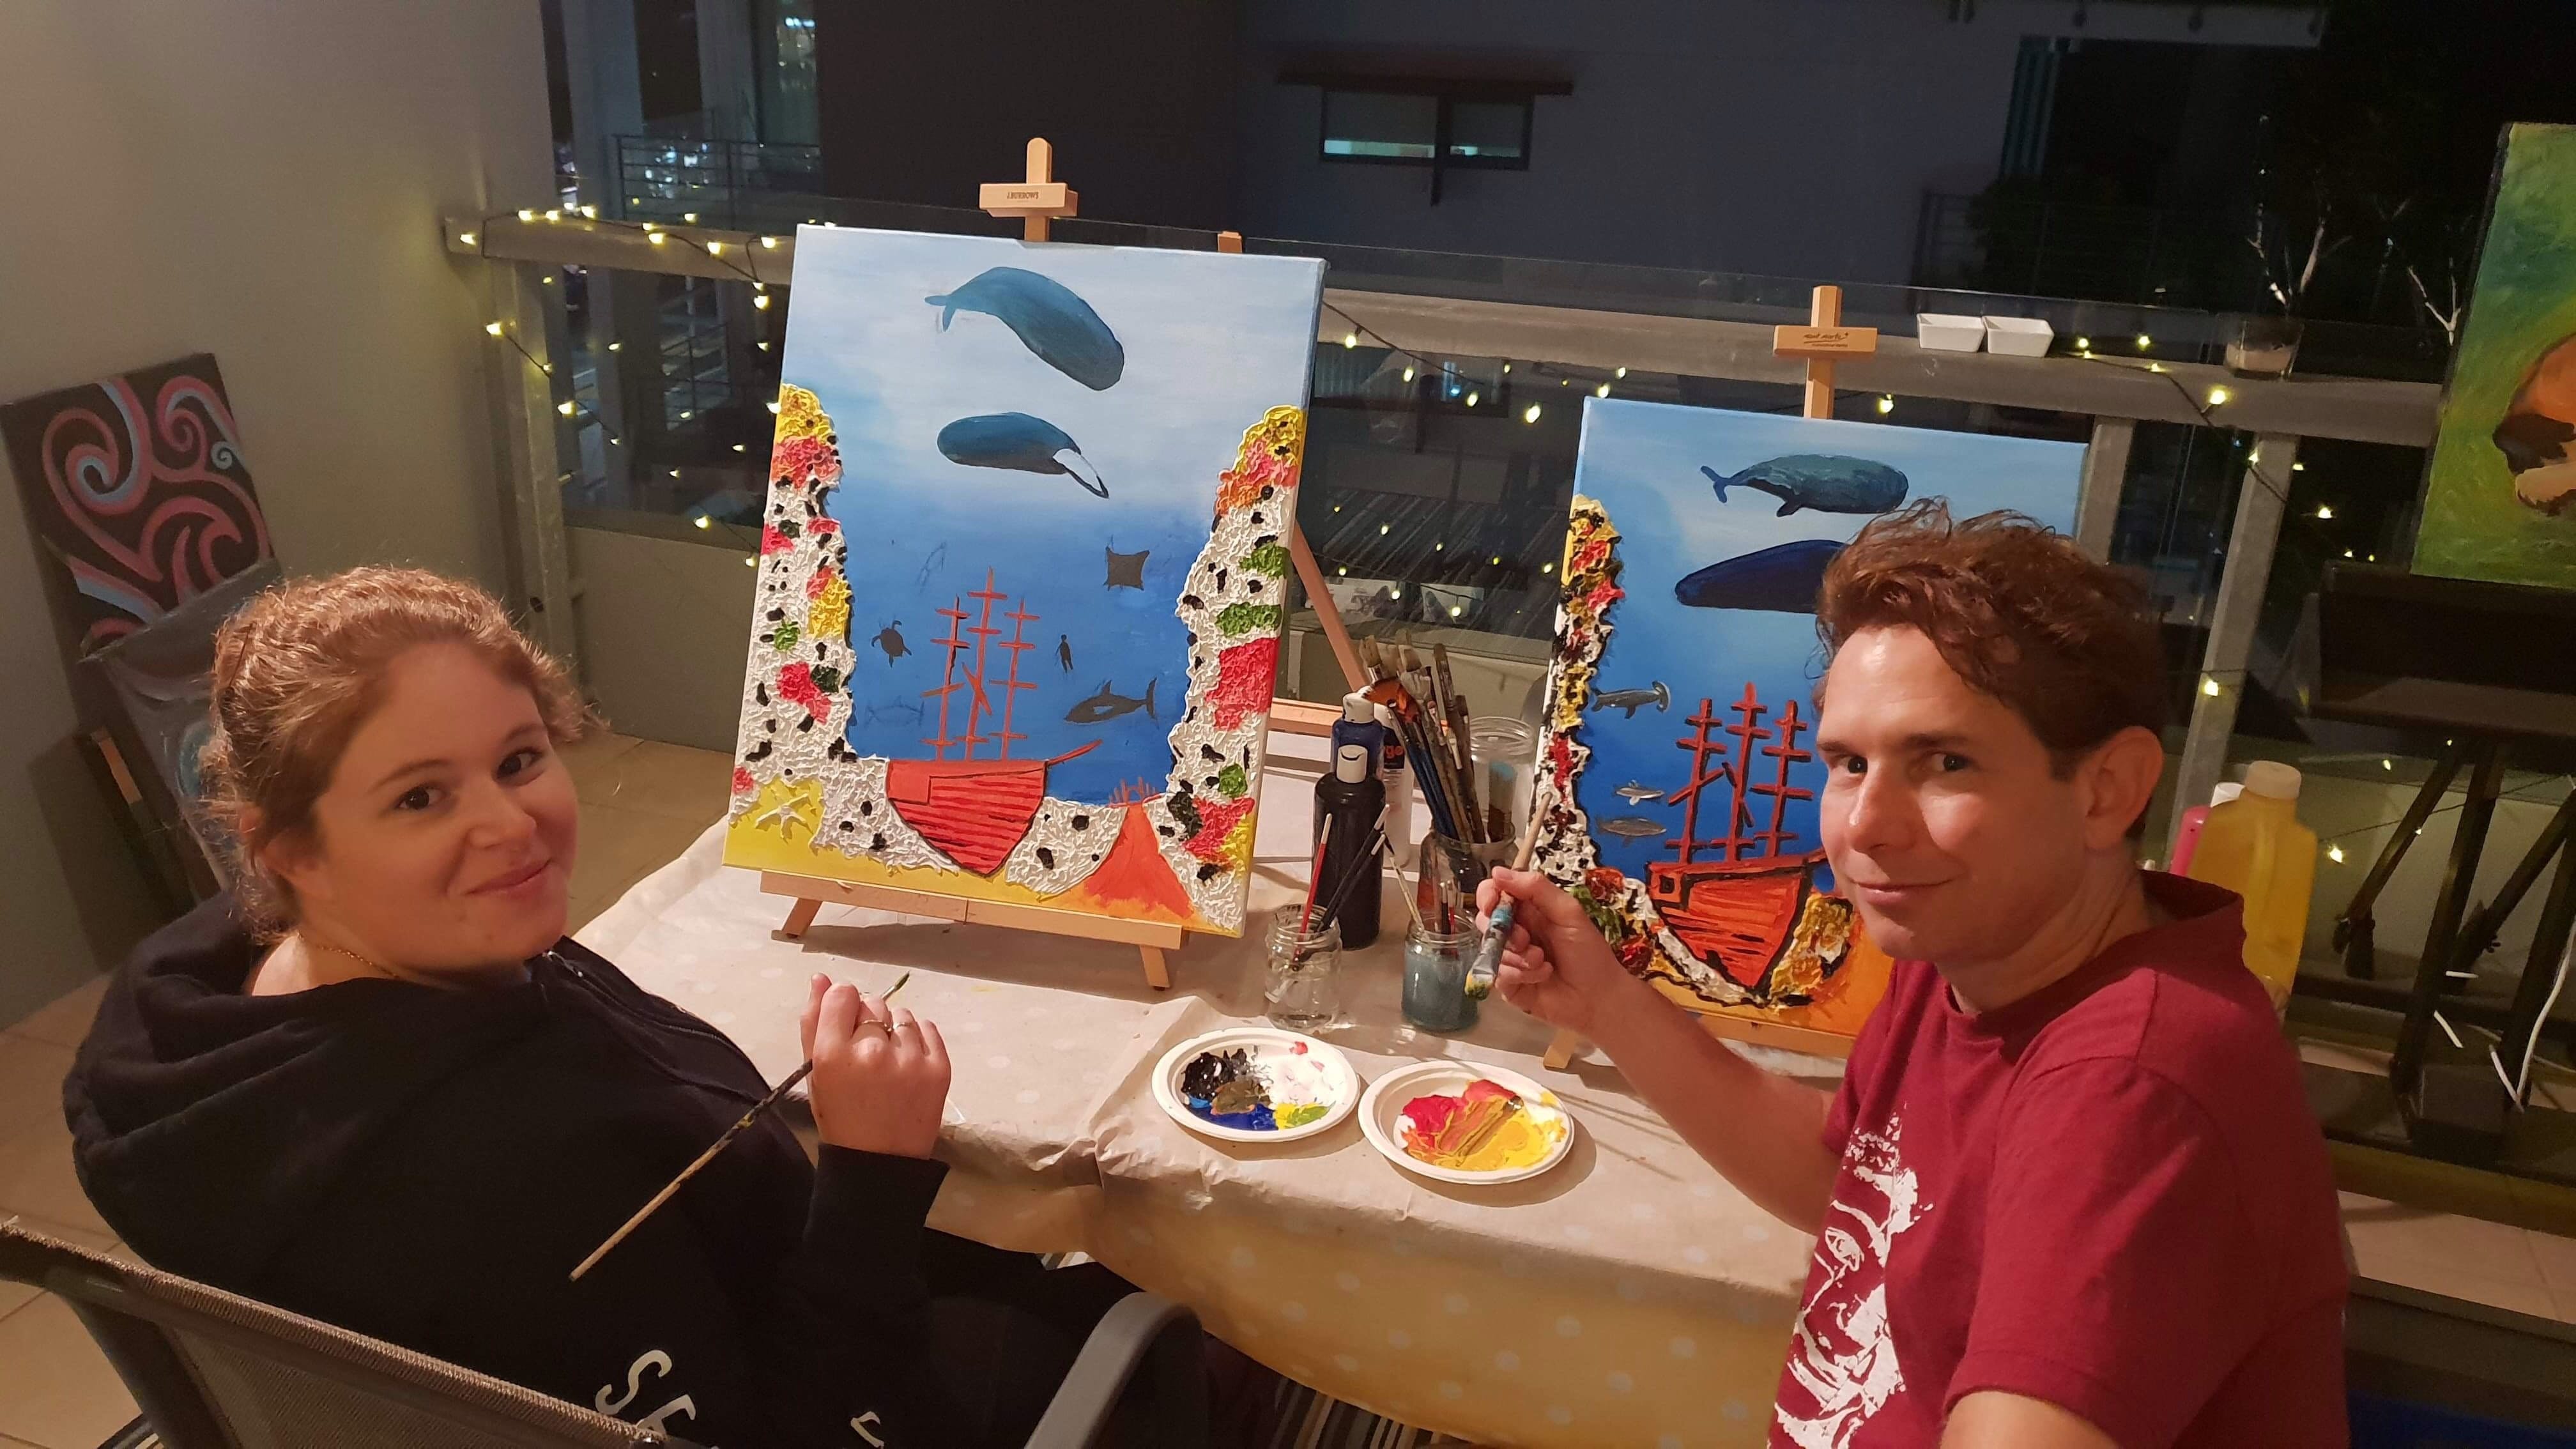 Paint and Sip Social Art Classes 2 for 1 - Accommodation Bookings